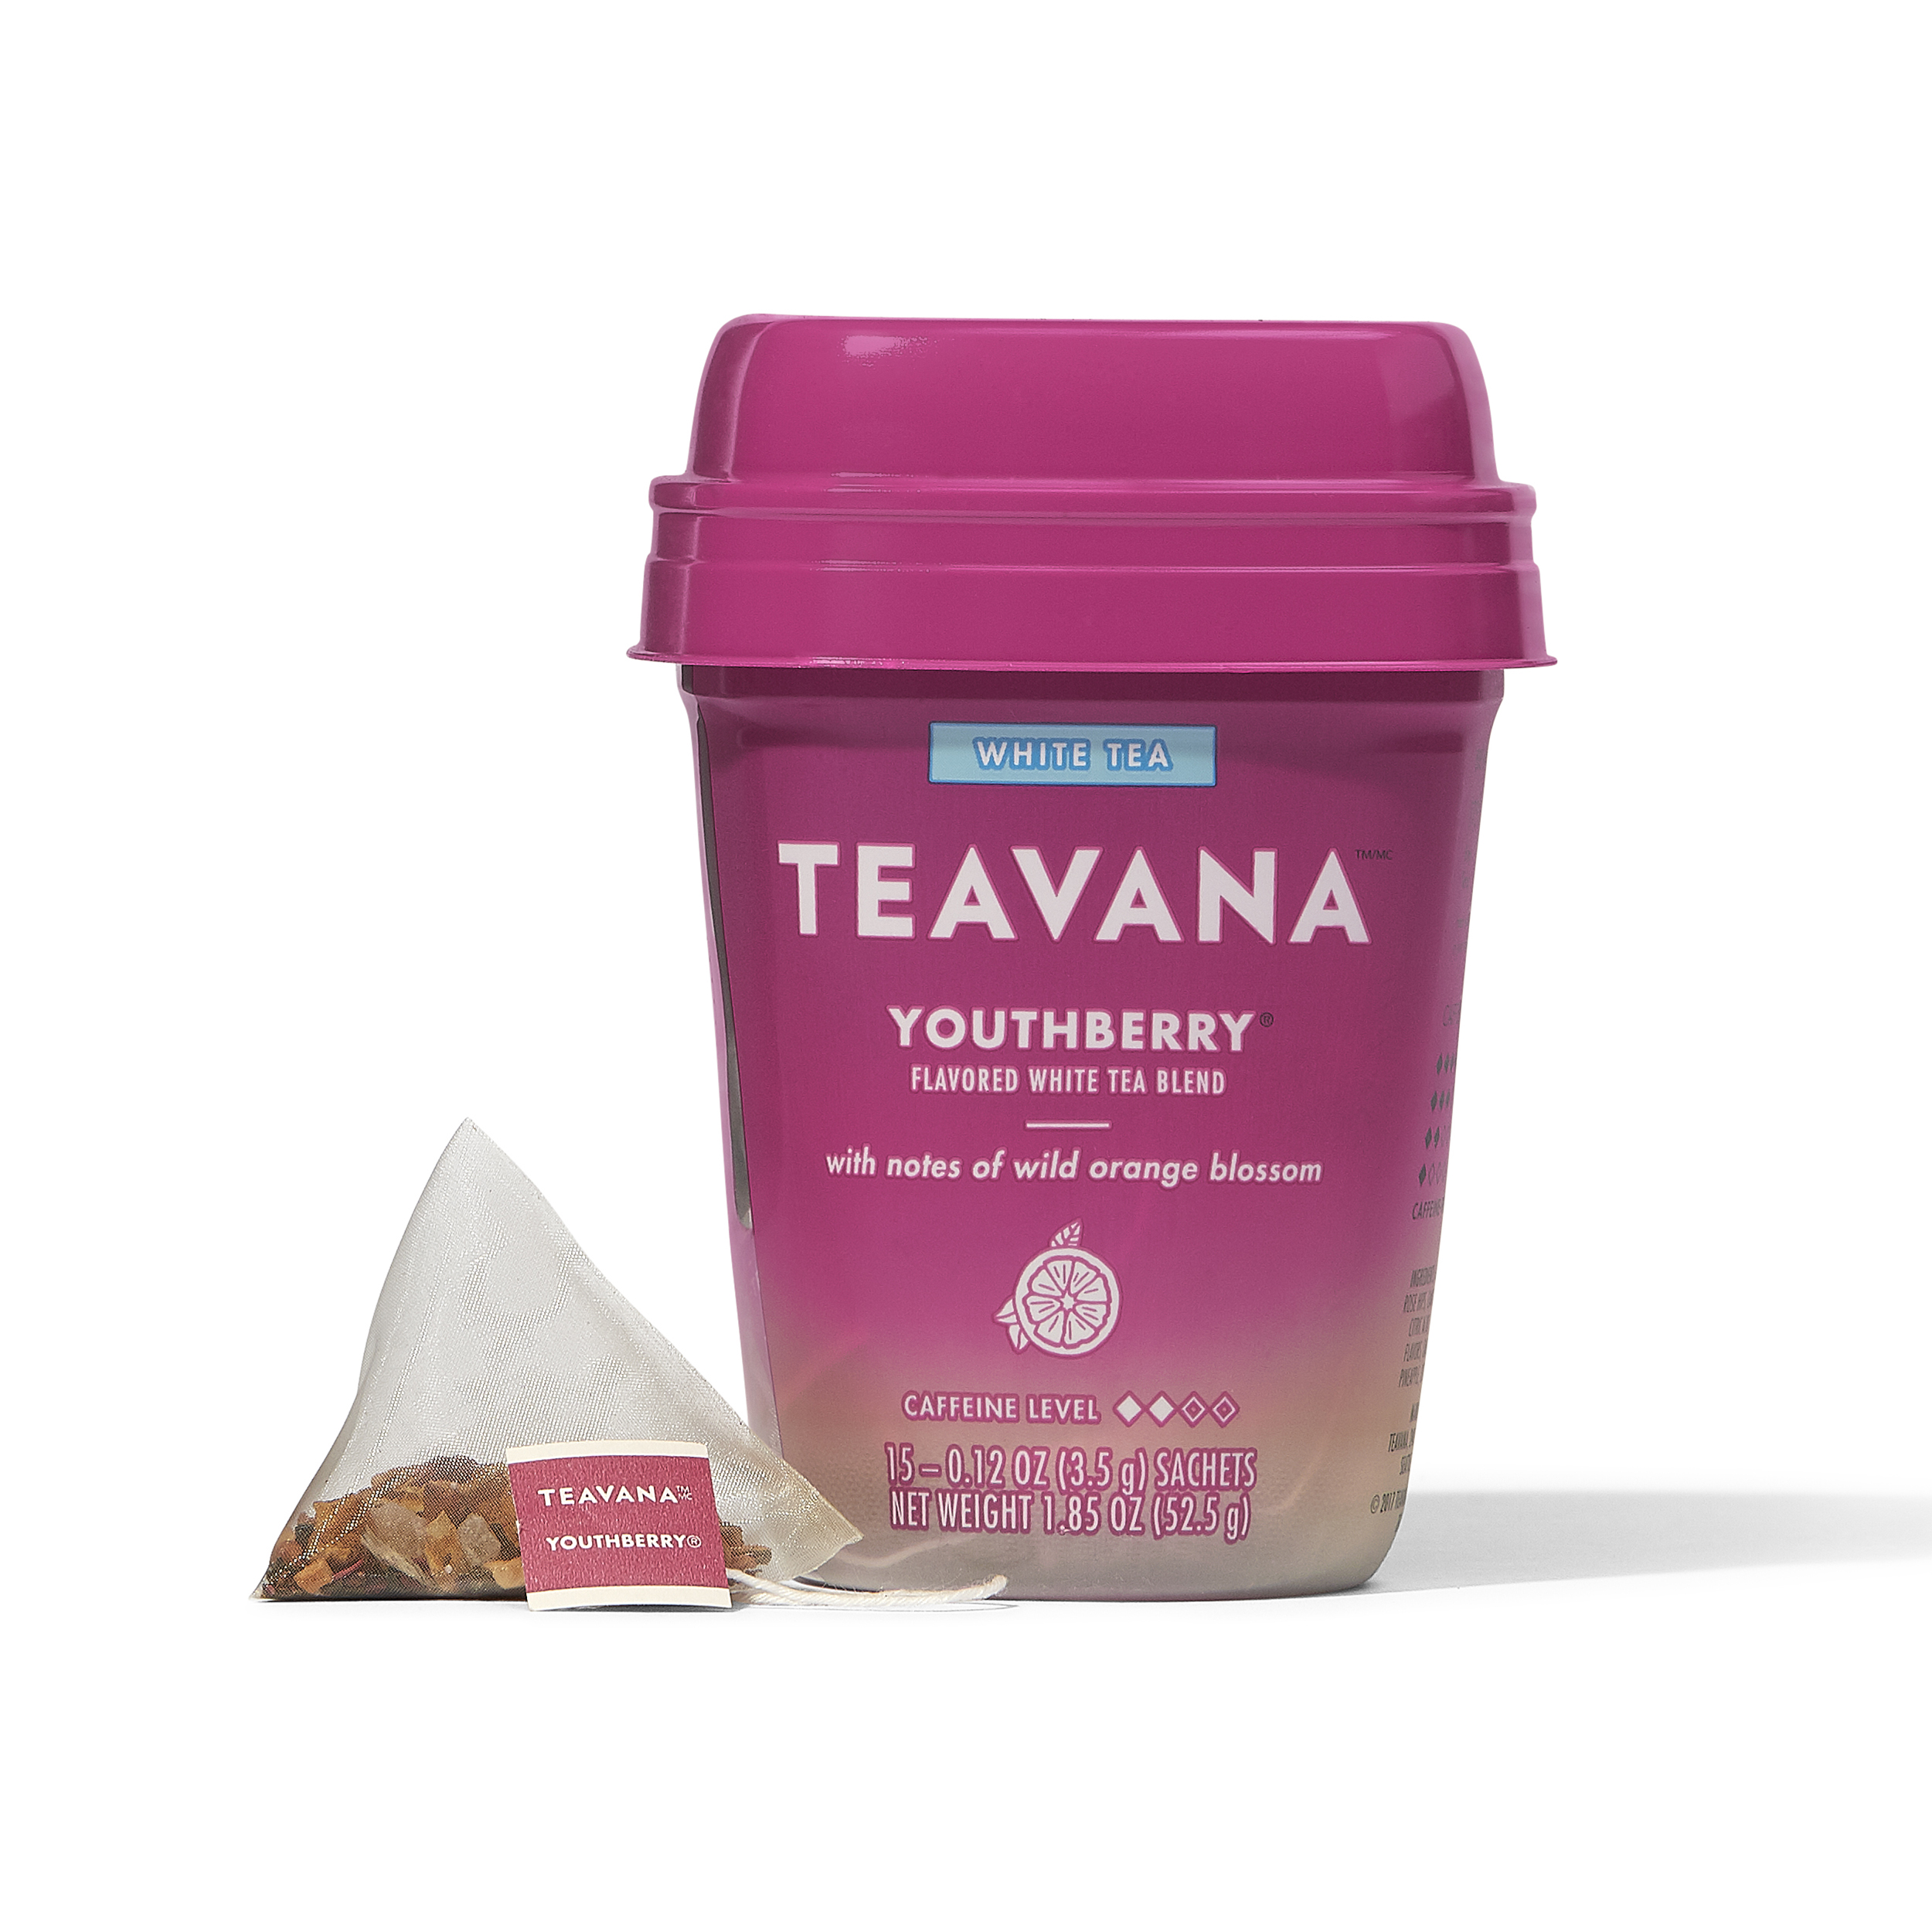 Teavana Youthberry, White Tea With Notes of Wild Orange Blossom, 15 Sachets - image 1 of 6